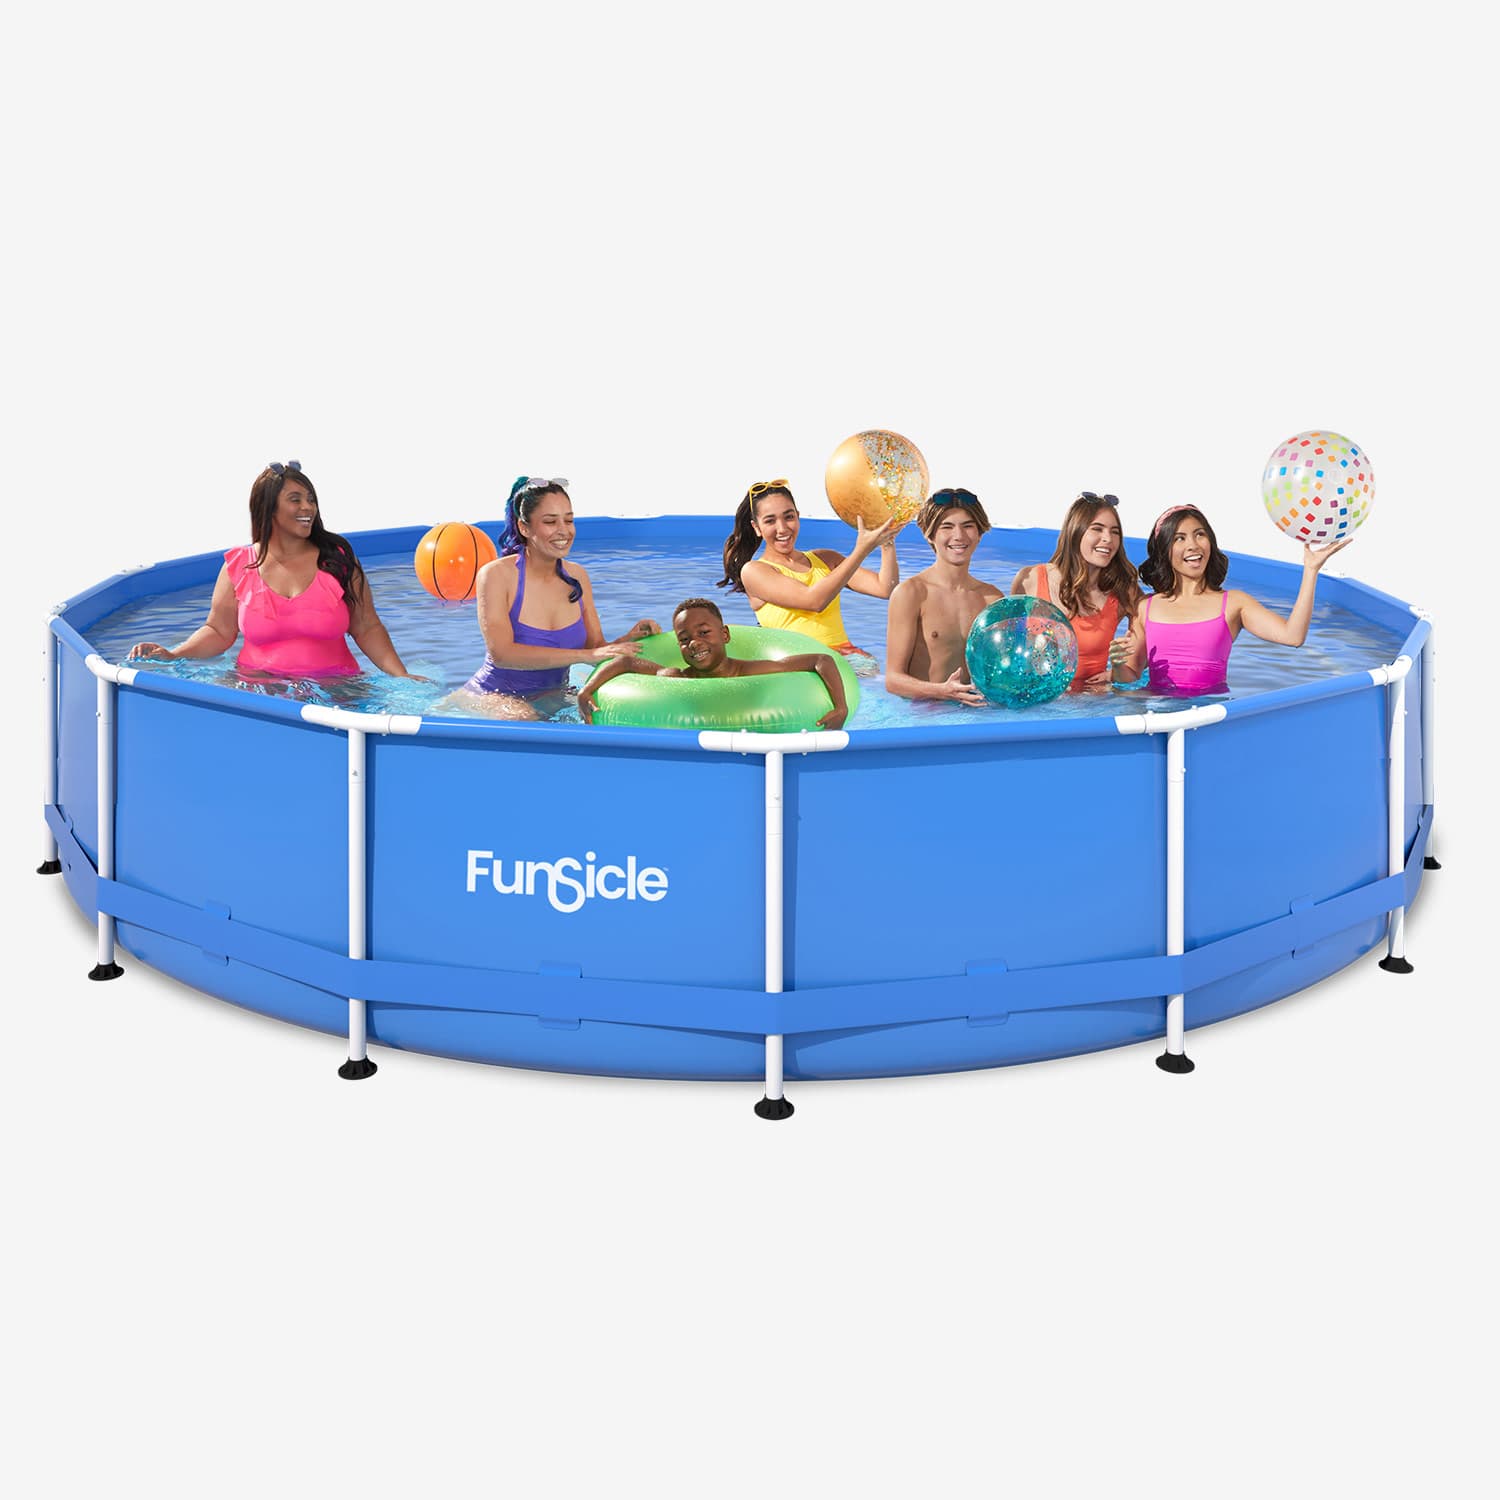 Funsicle 15 ft Activity Pool with people